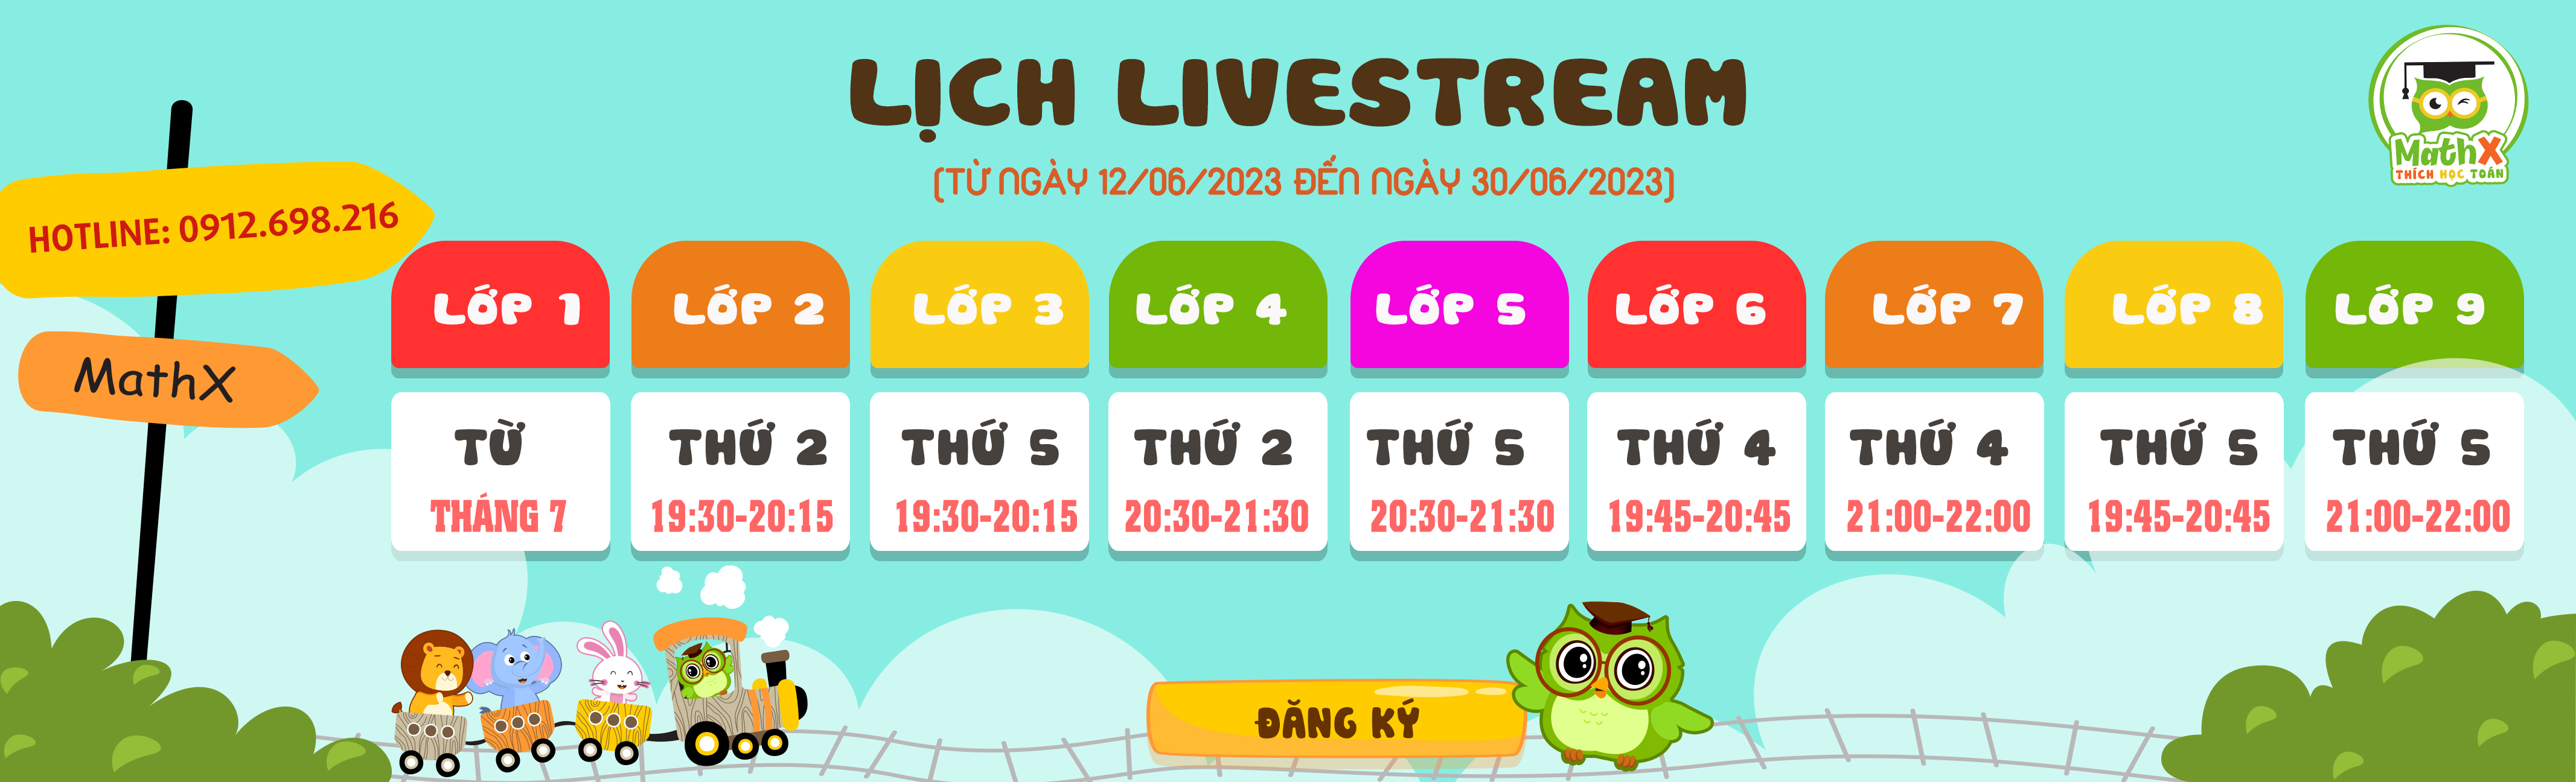 Lịch live